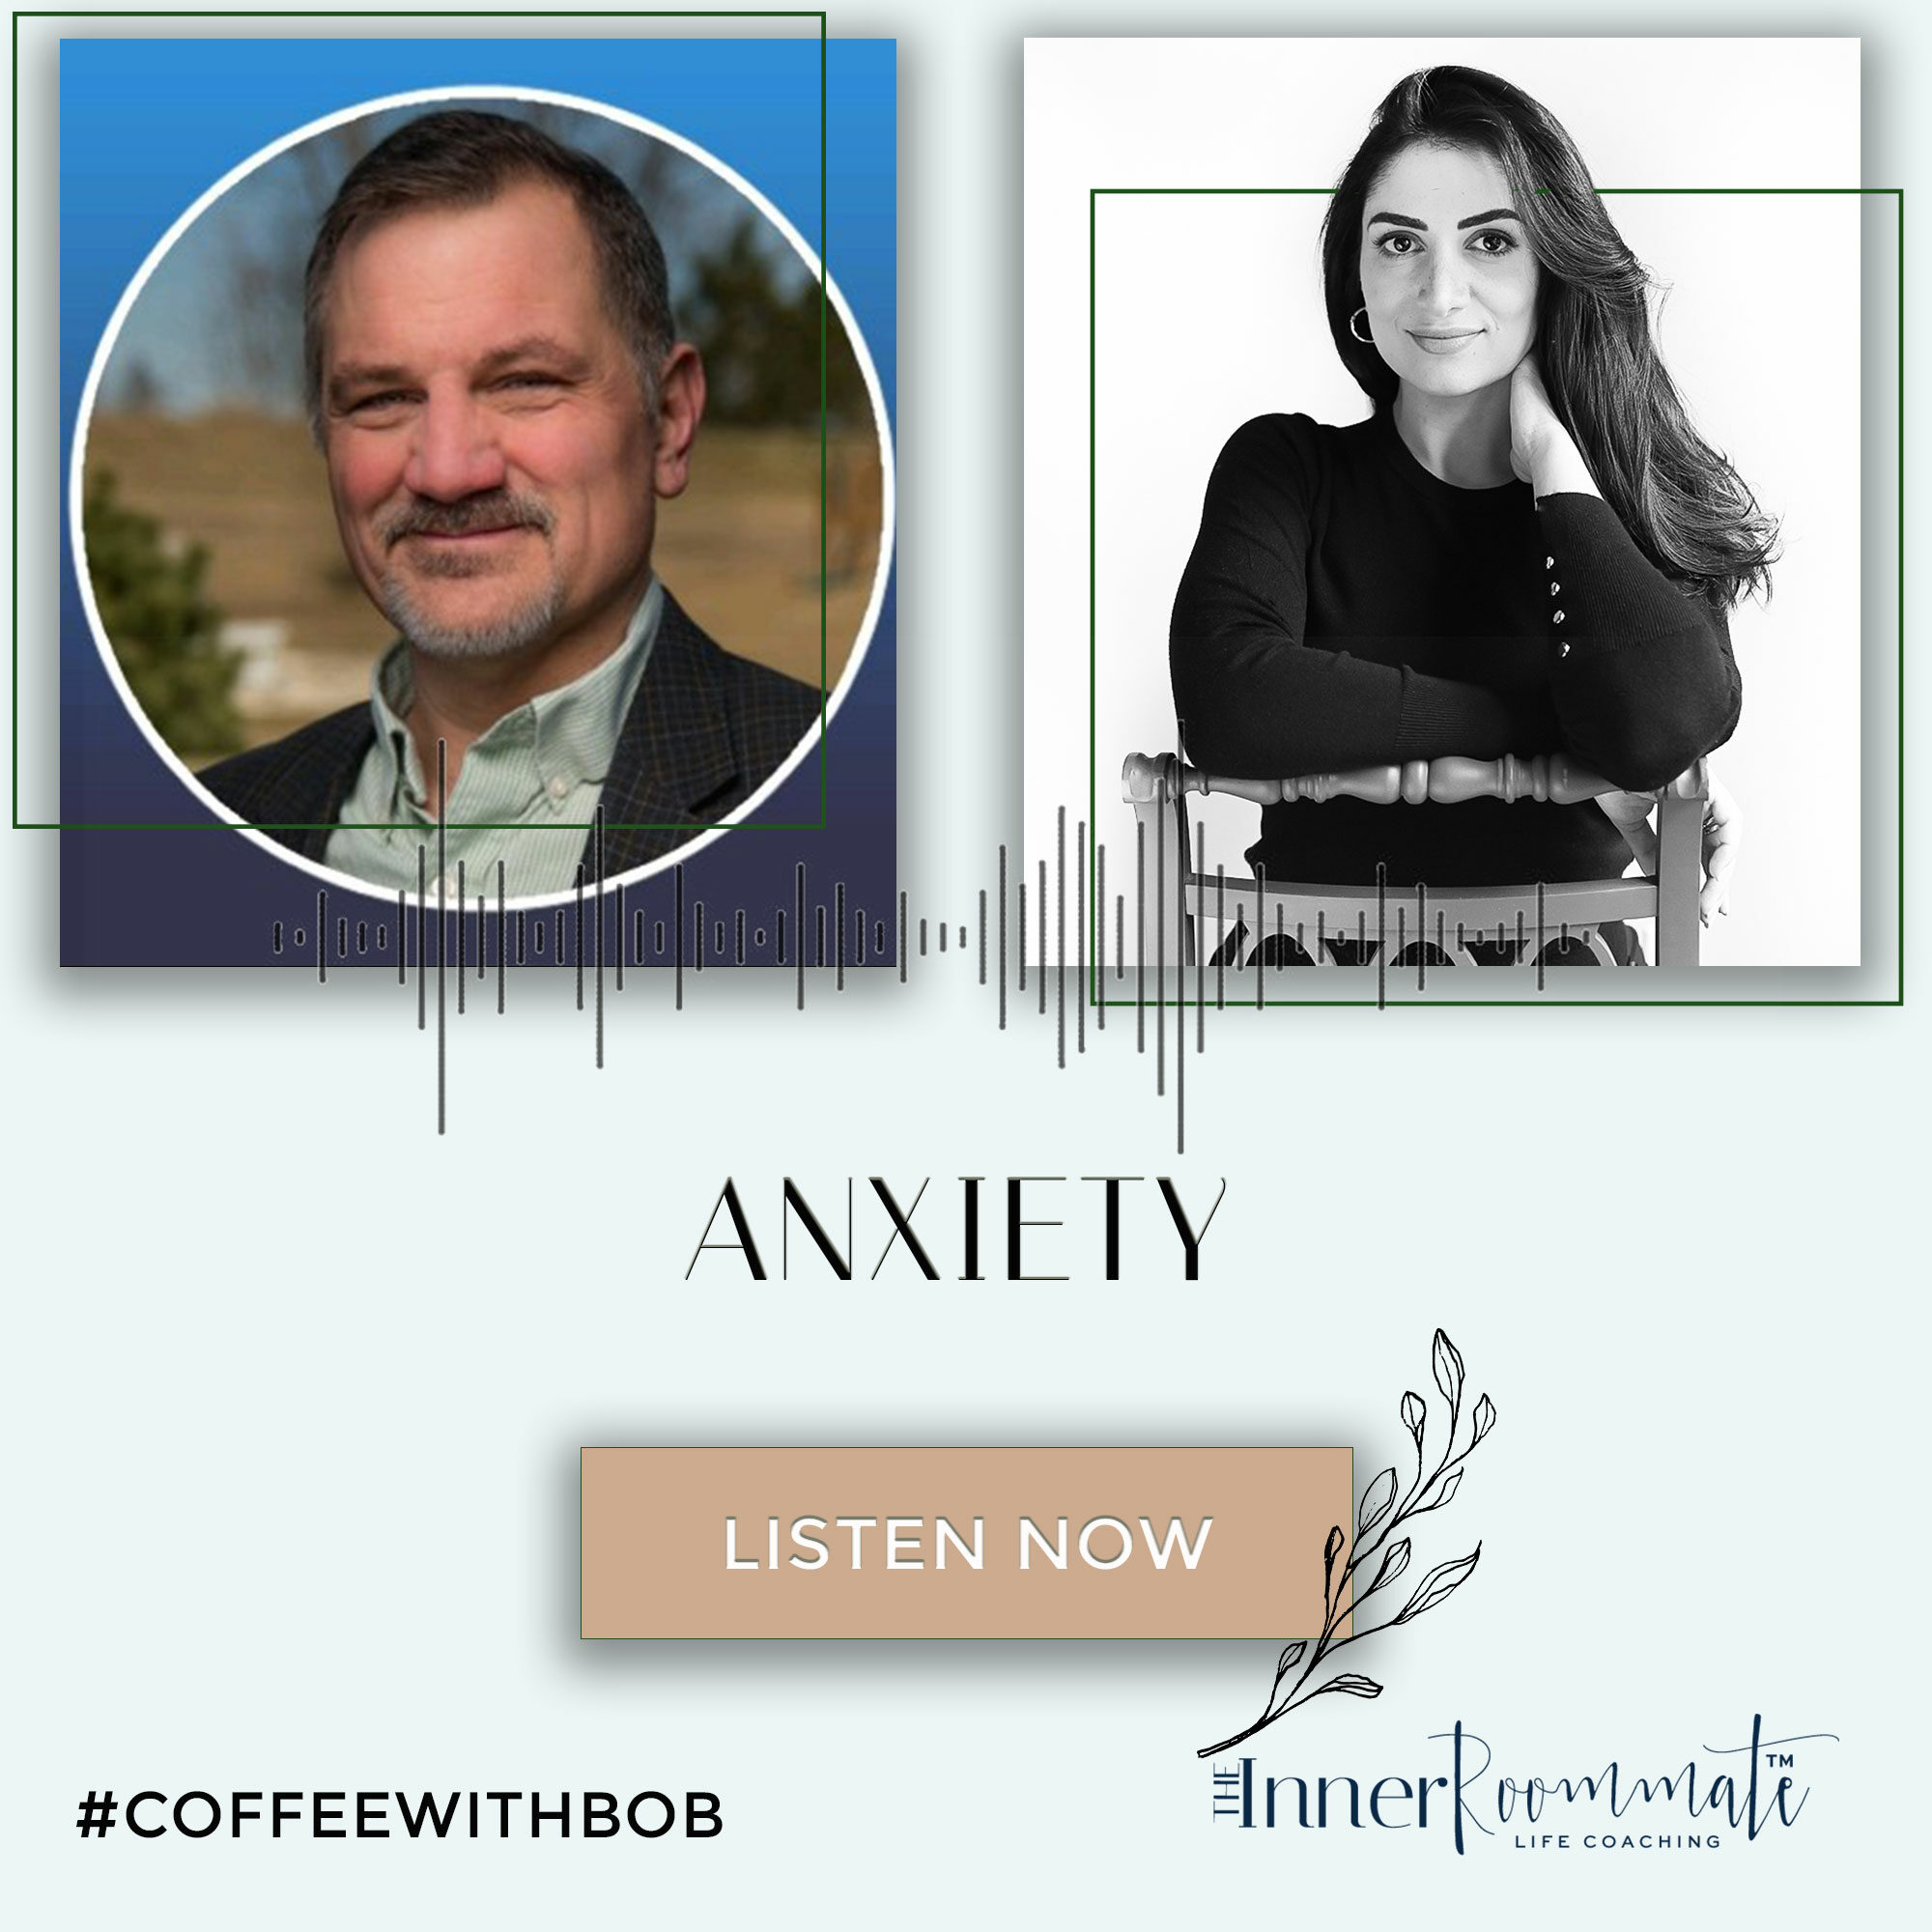 Tune in as we discuss dealing with anxiety and improving your leadership skills.